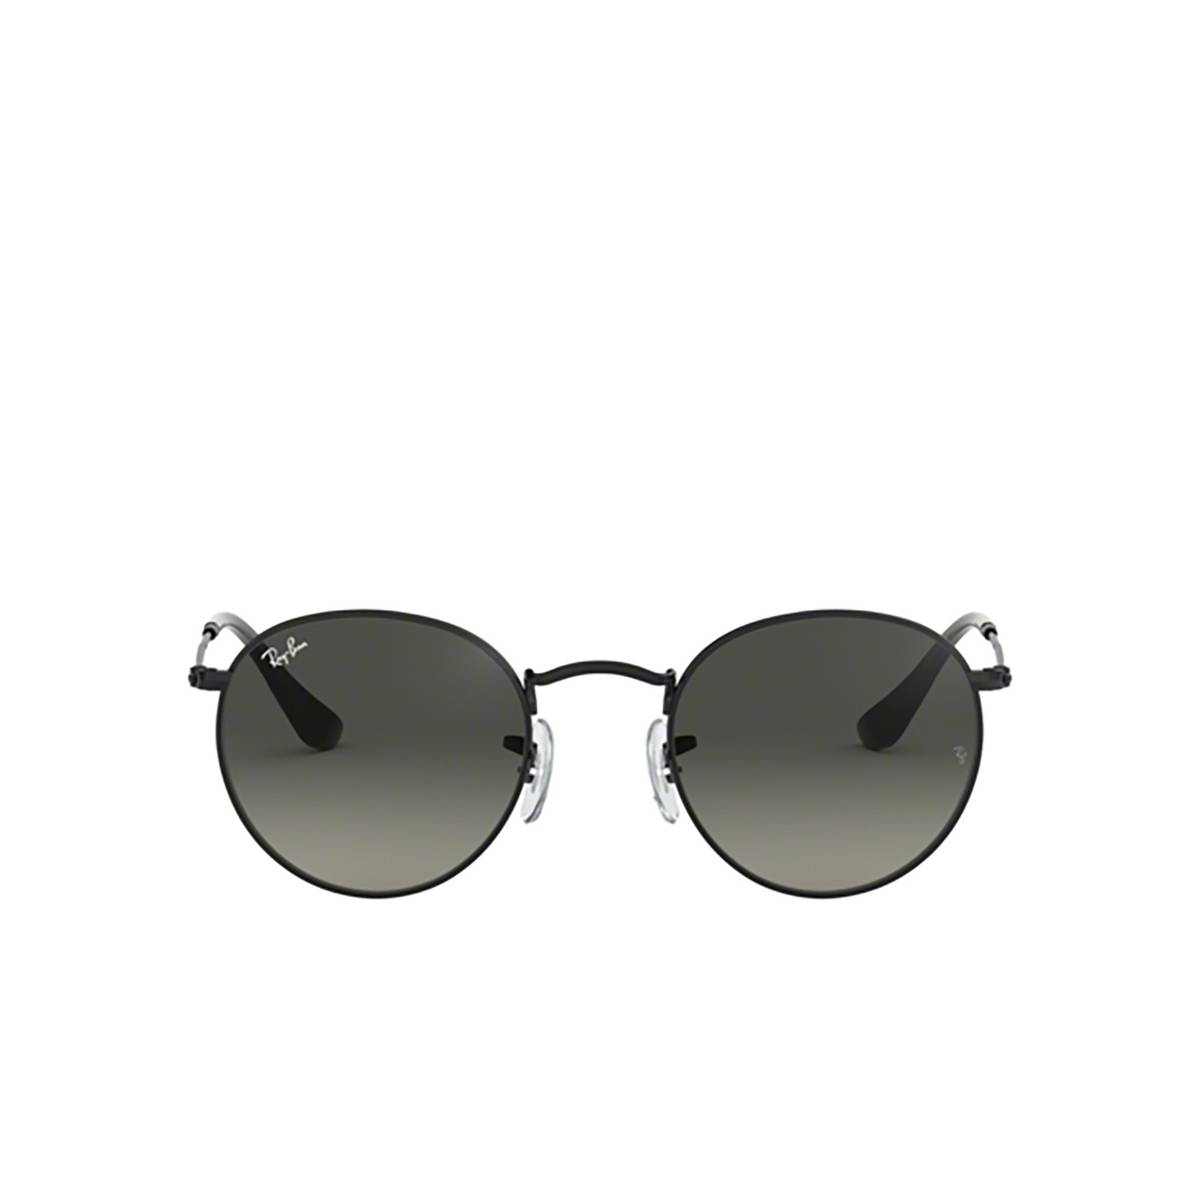 Ray-Ban ROUND METAL Sunglasses 002/71 Black - front view